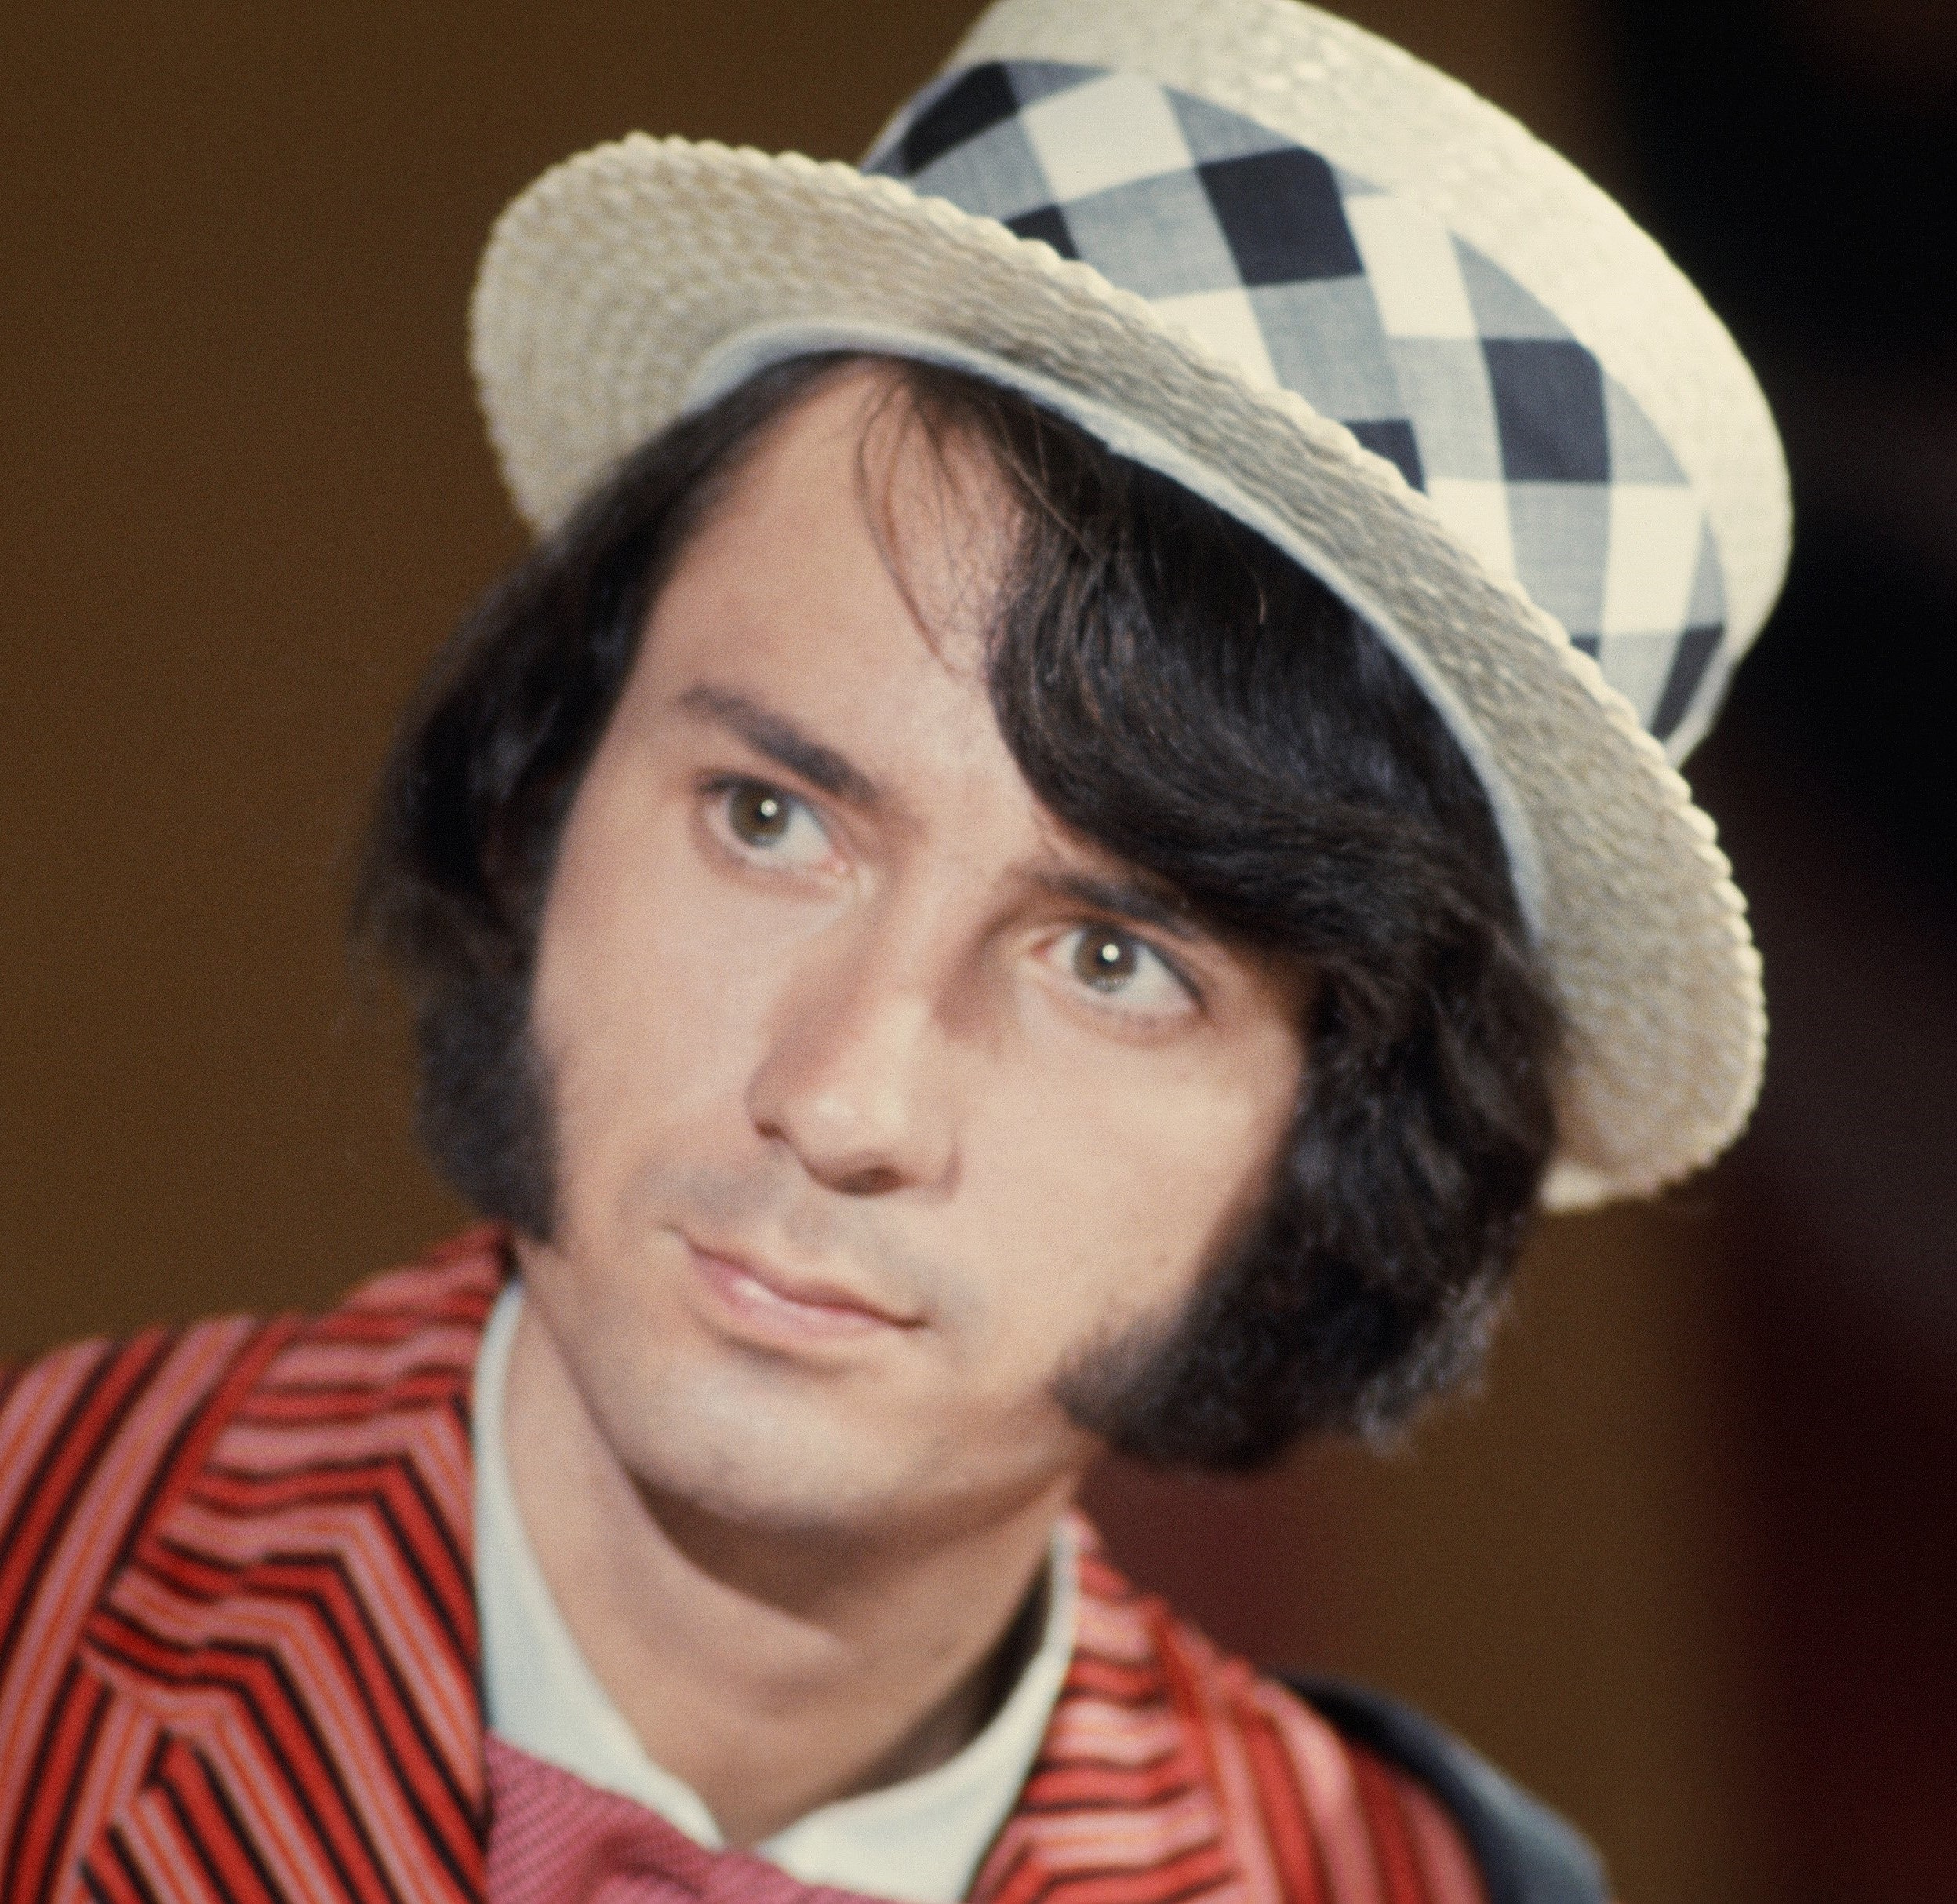 The Monkees Barely Contributed to an Album Mike Nesmith Liked